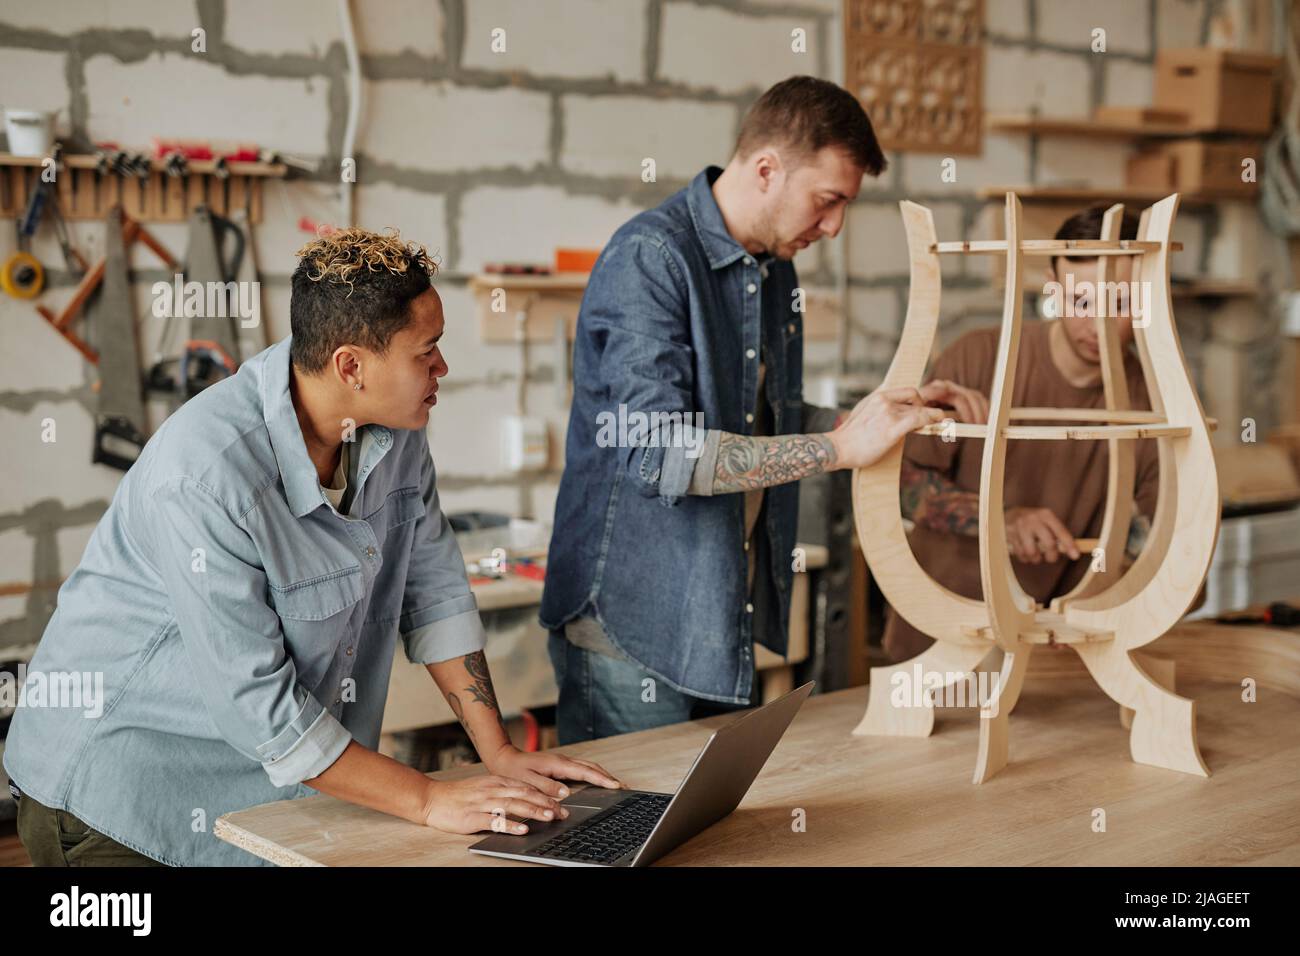 Warm toned portrait of two modern carpenters designing wooden furniture in workshop interior Stock Photo